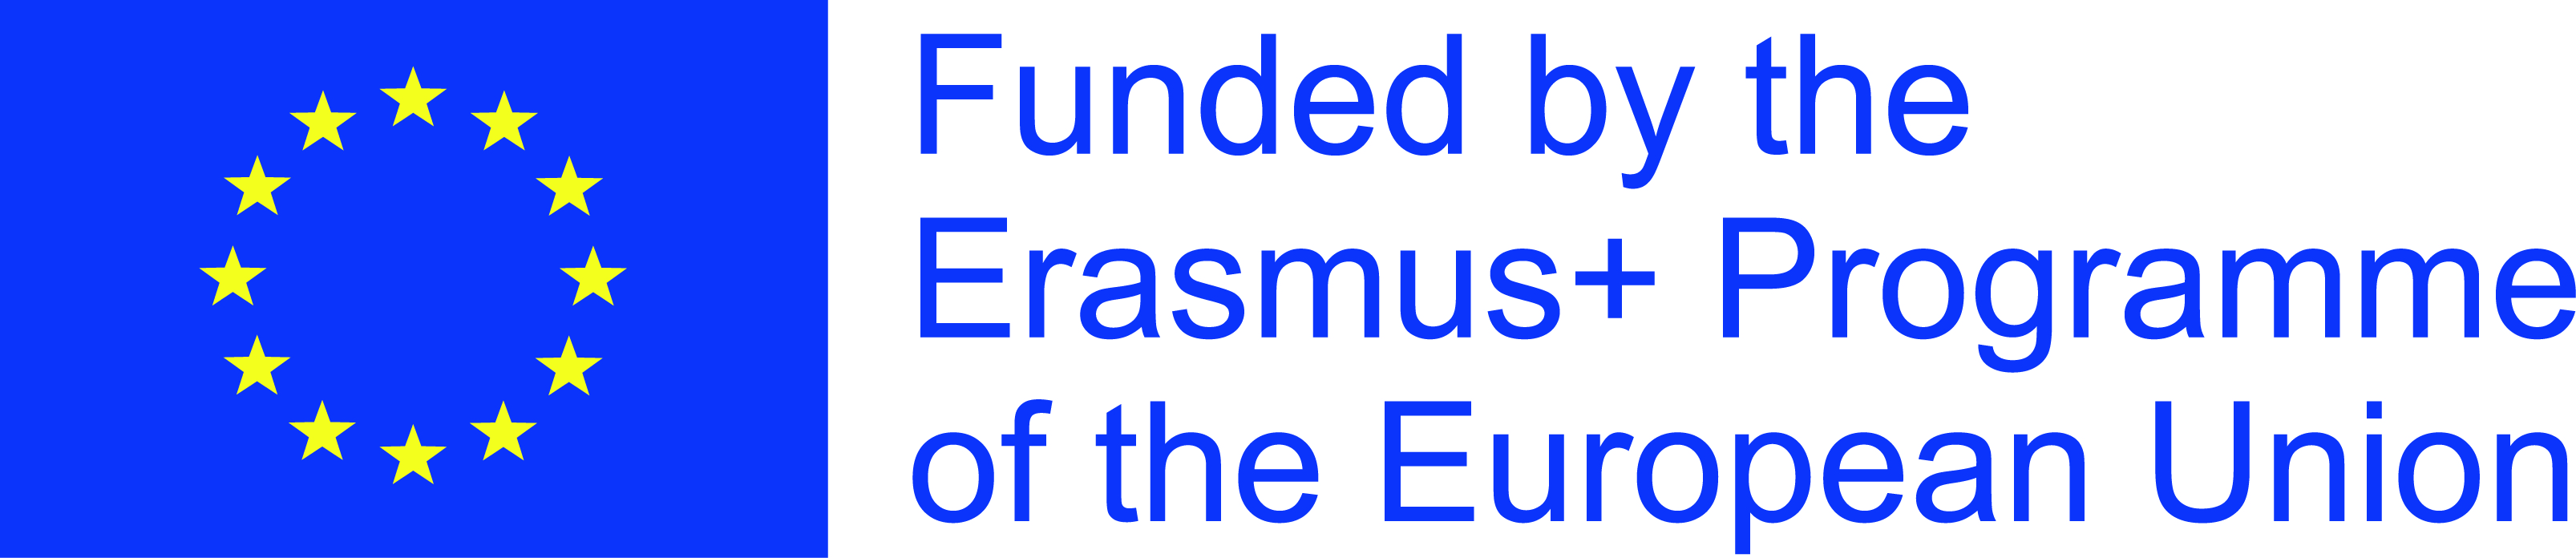 Funded by ERASMUS PLUS of the European Union